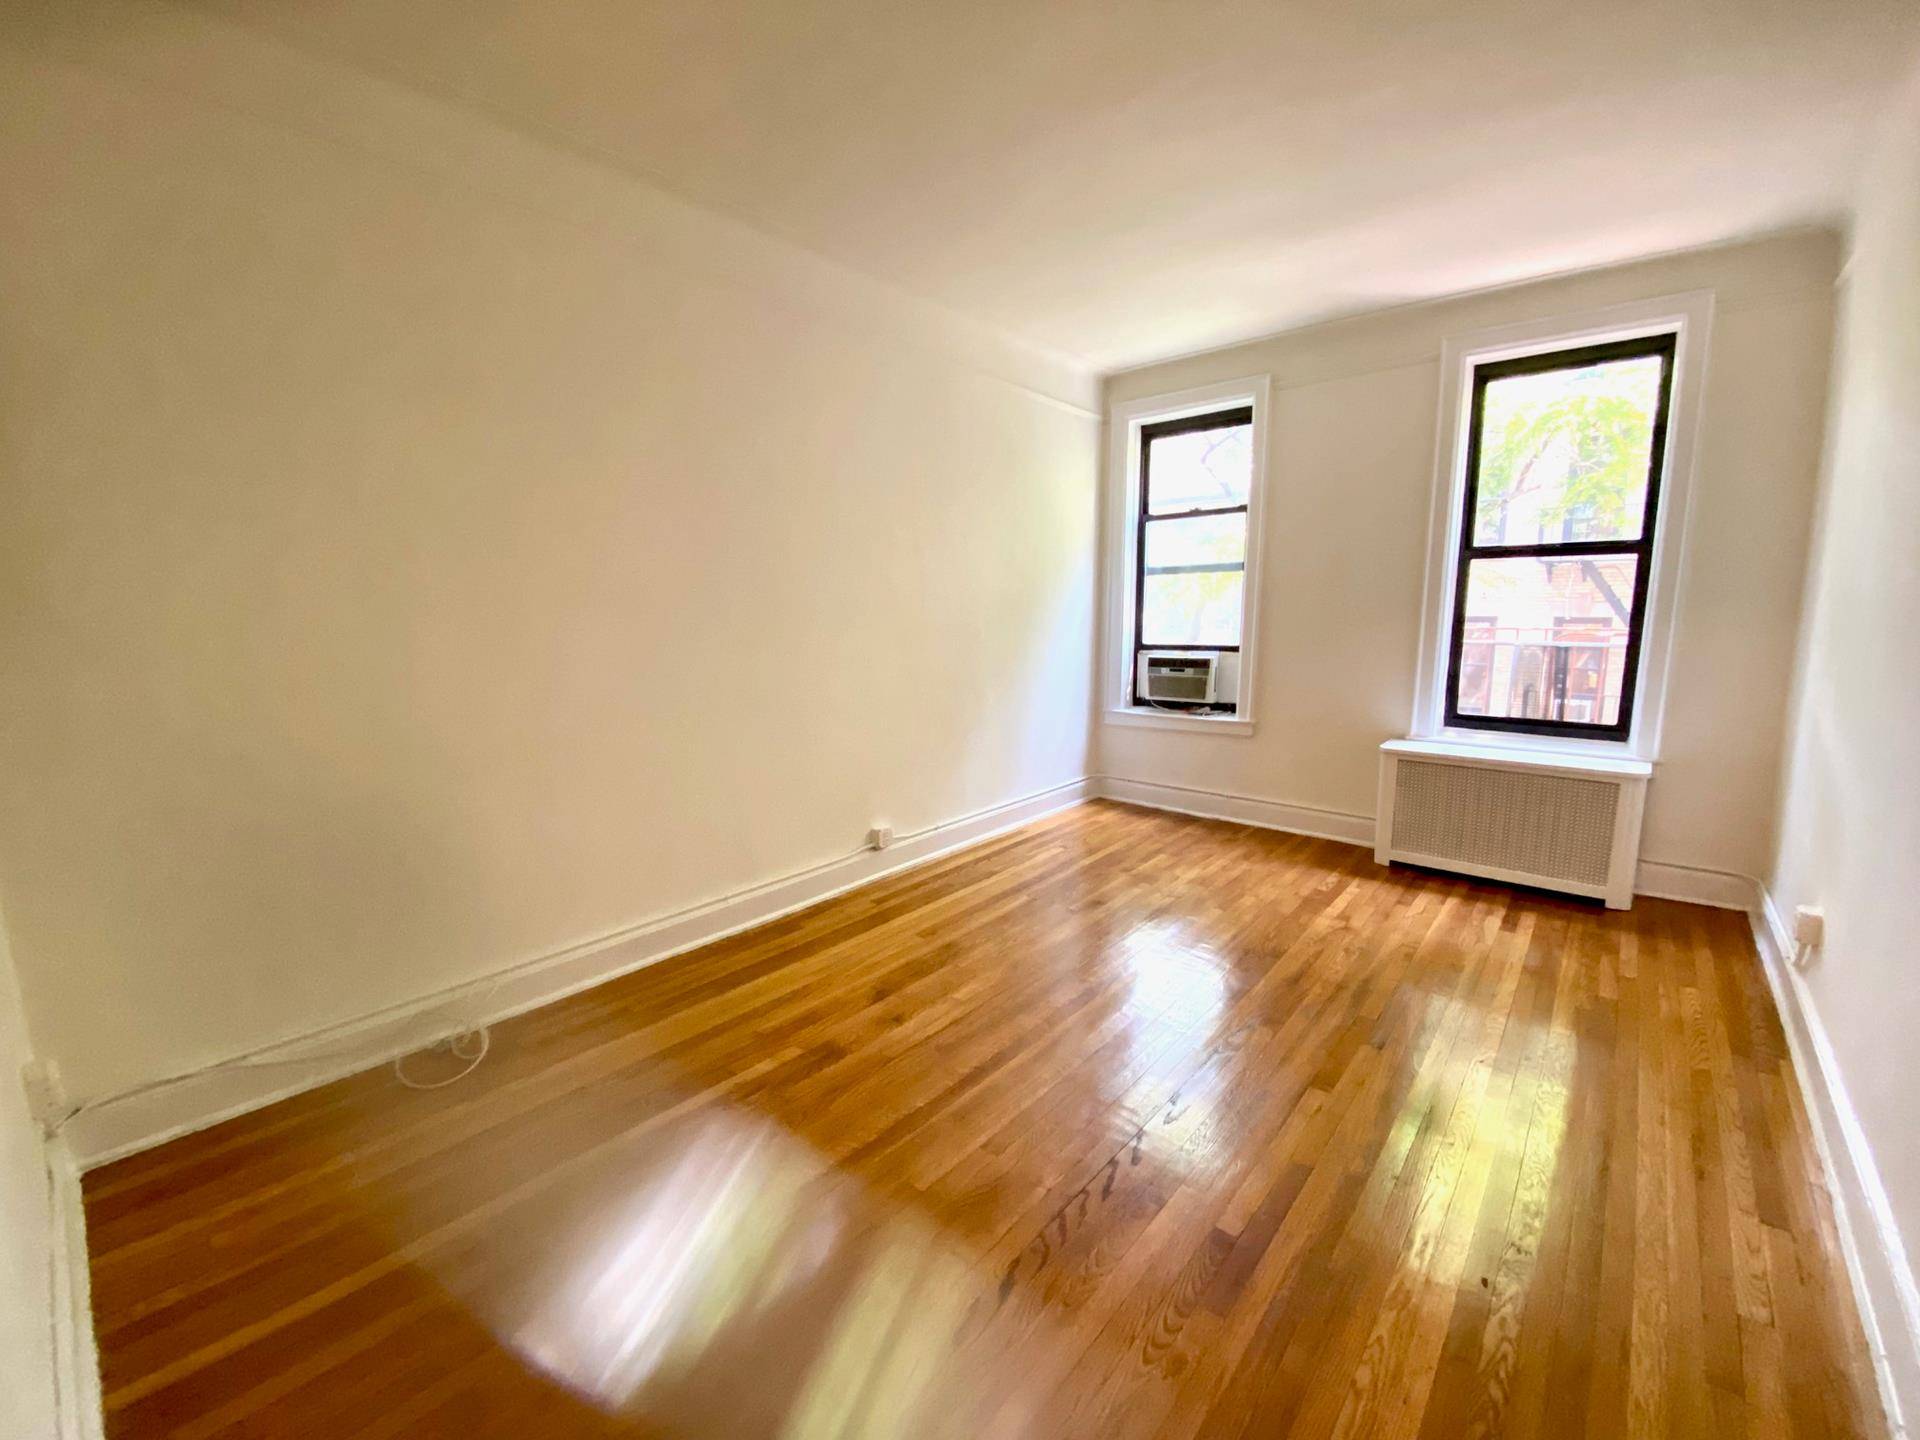 PLEASE EMAIL ONLY No calls texts due to volume Available ImmediatelyRenovated 1 bedroom with Dishwasher in the heart of the West Village in an ELEVATOR RENTAL BUILDING.